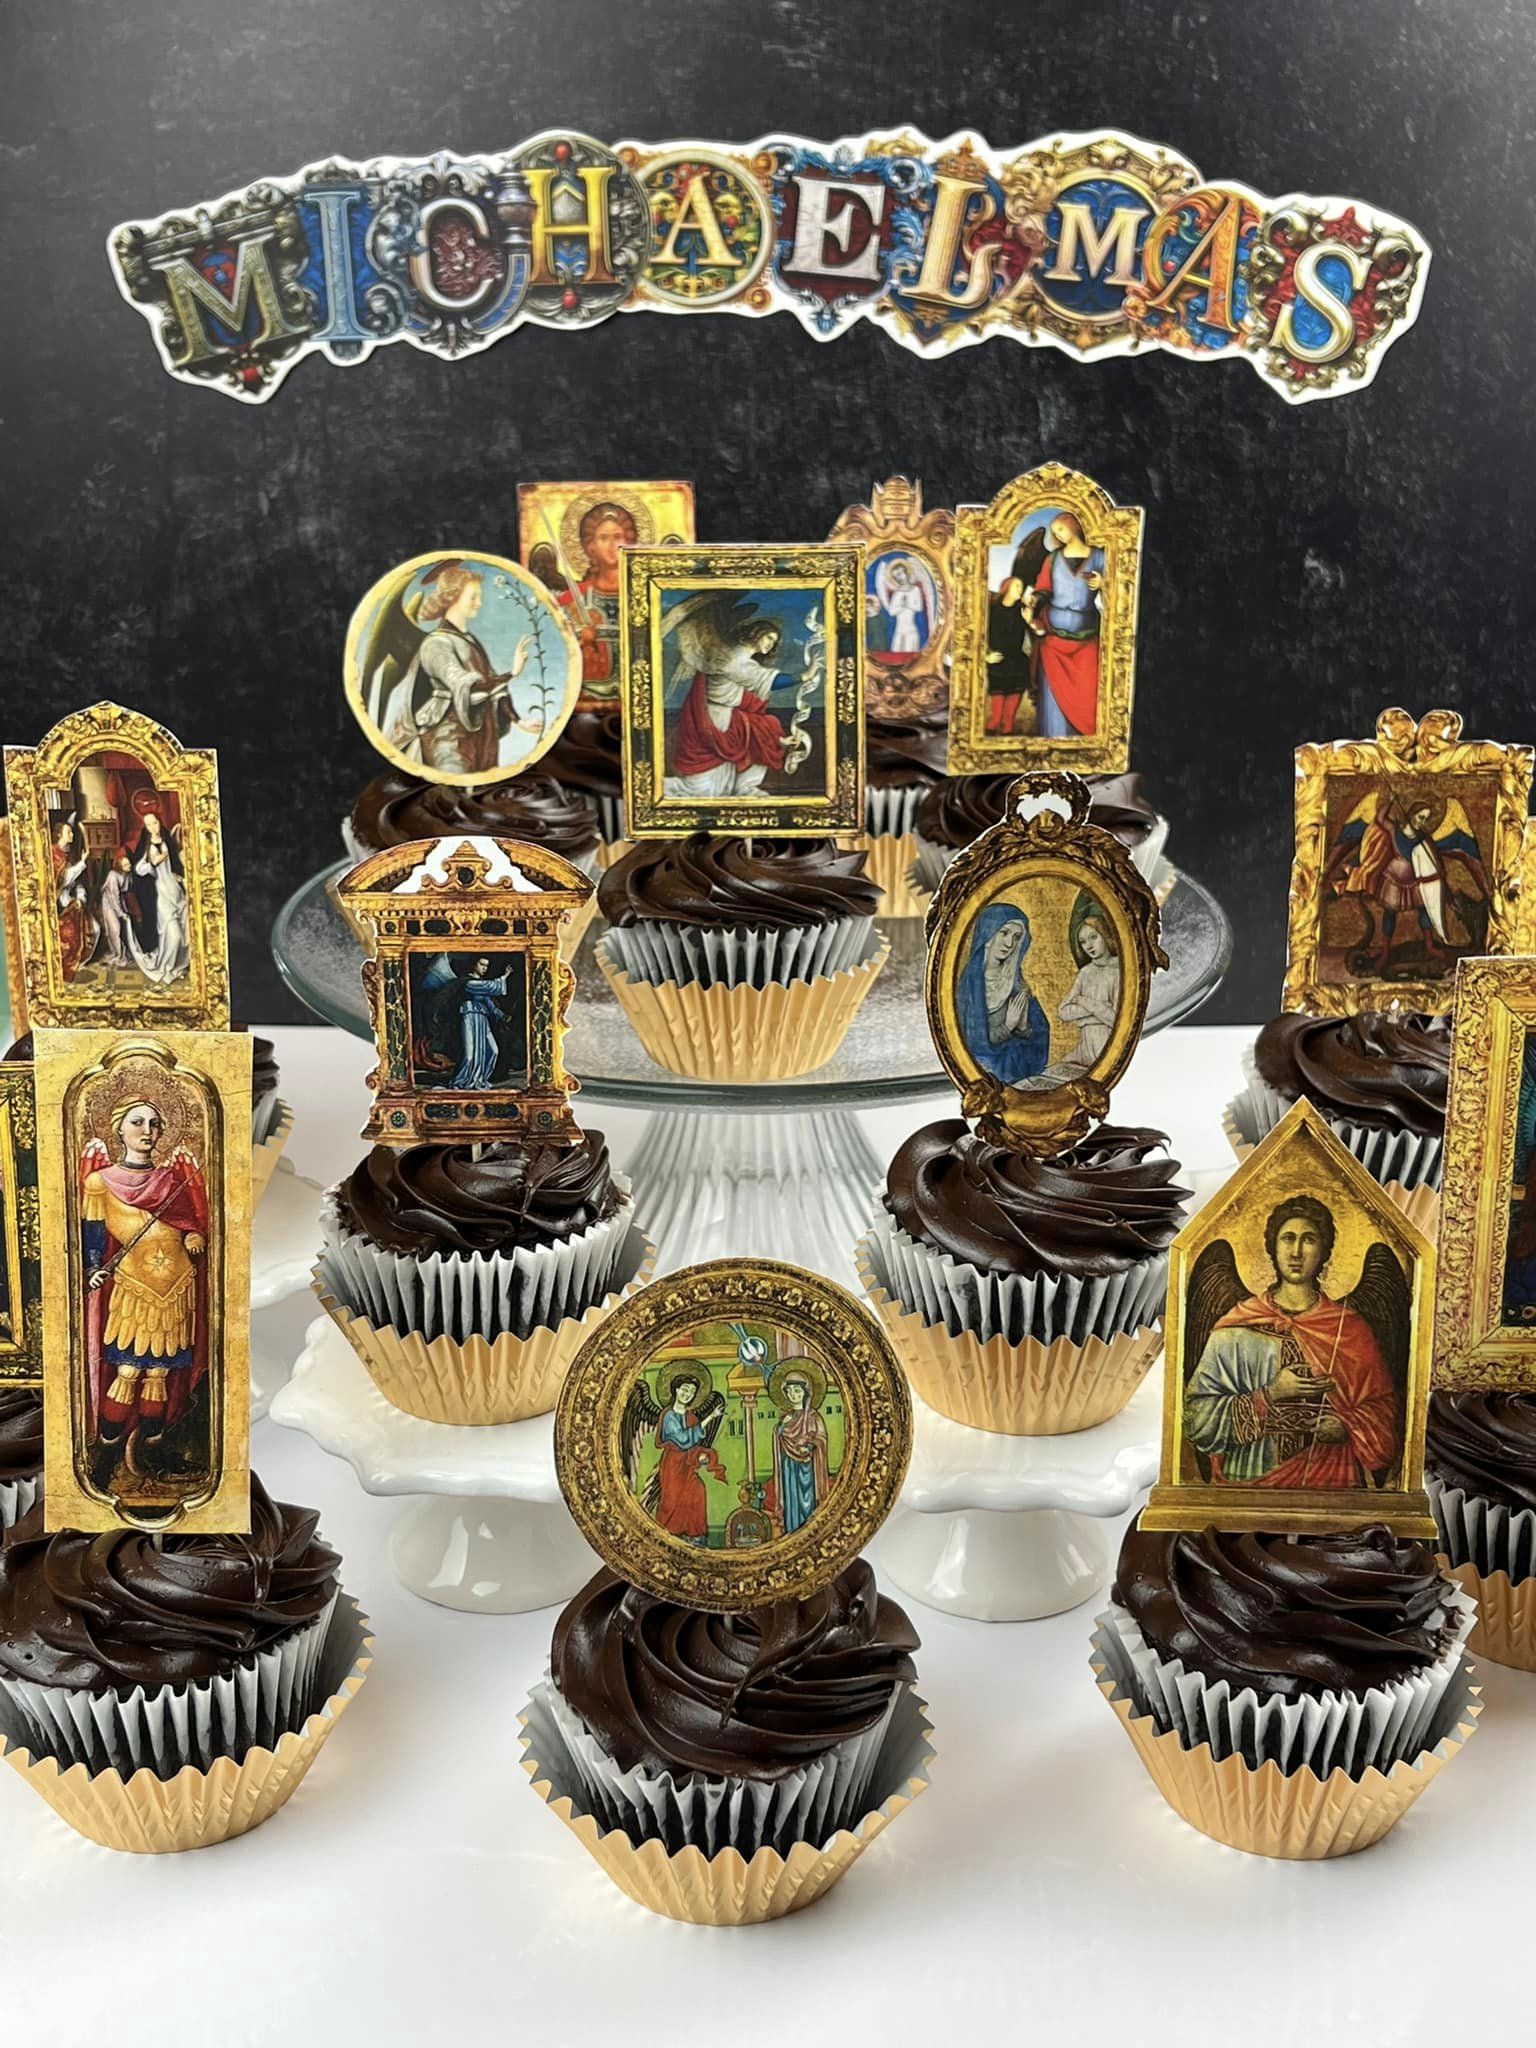 Michaelmas Banner and Cupcake Toppers